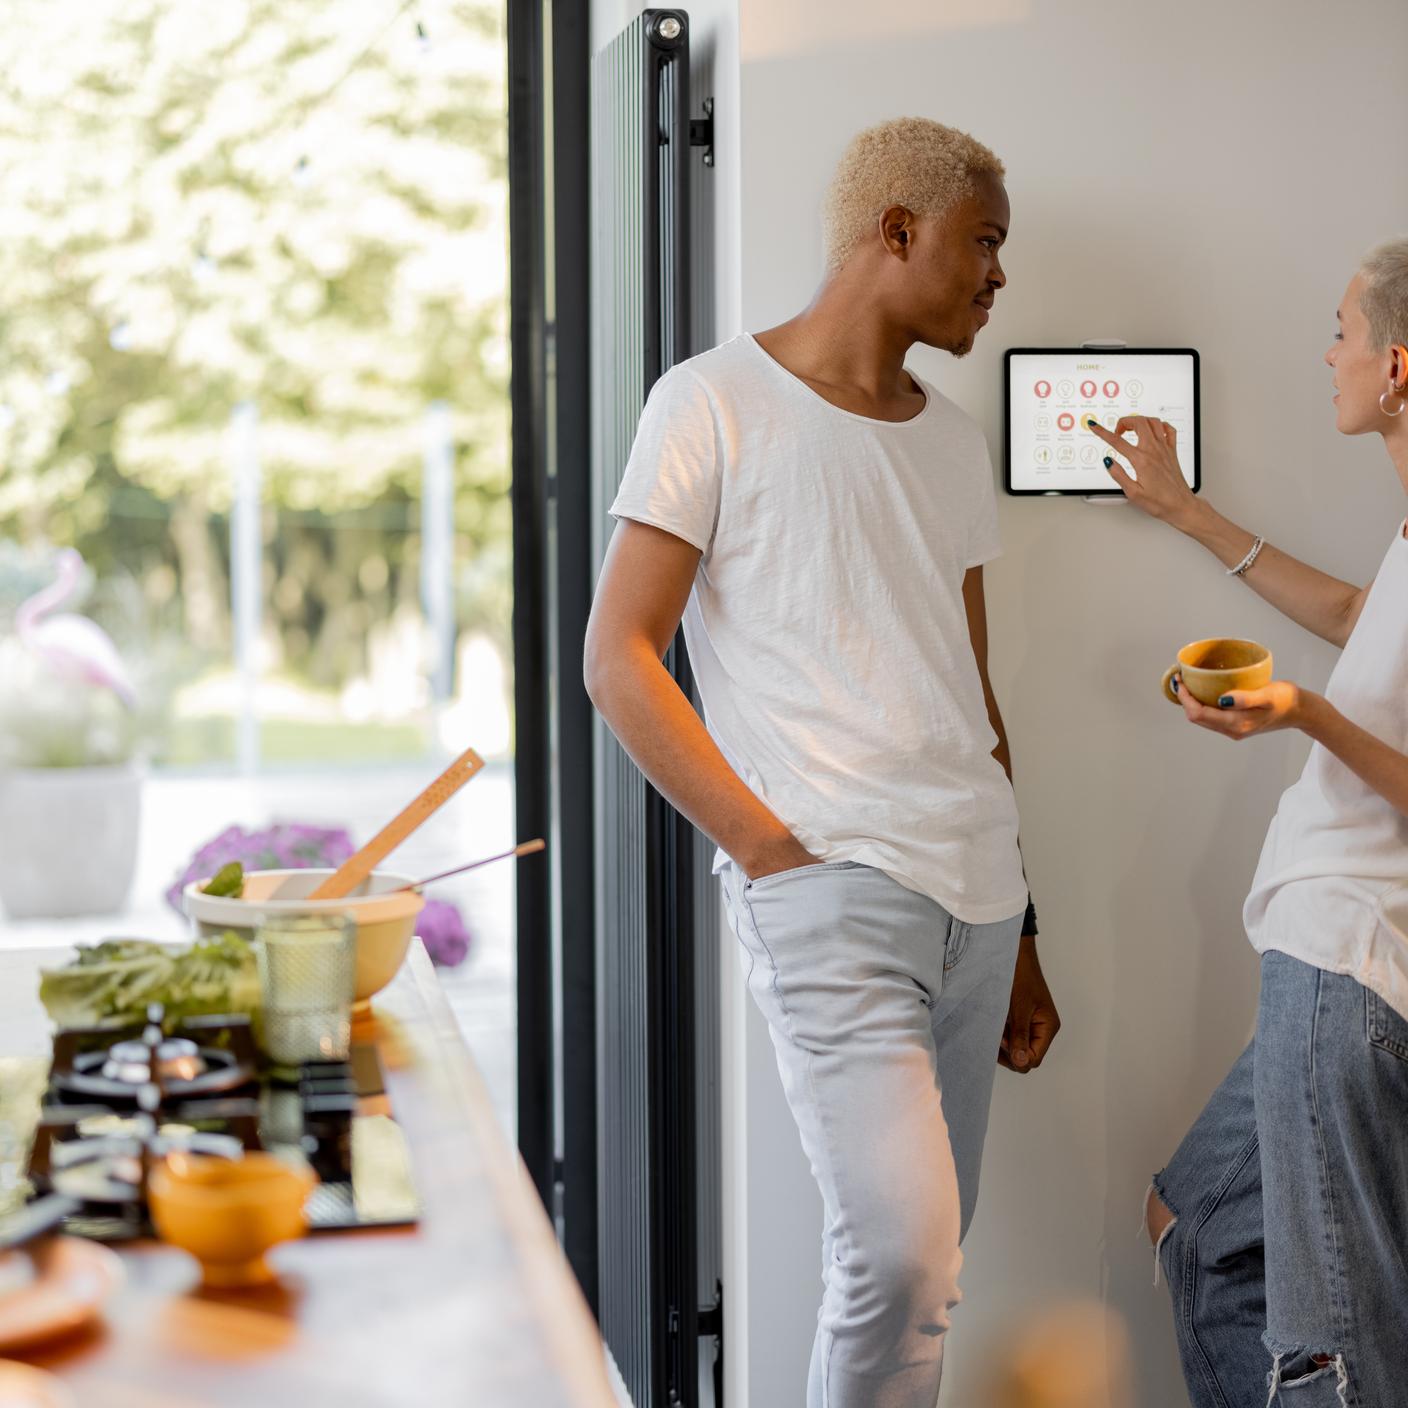 Couple choosing temperature on thermostat while cooking